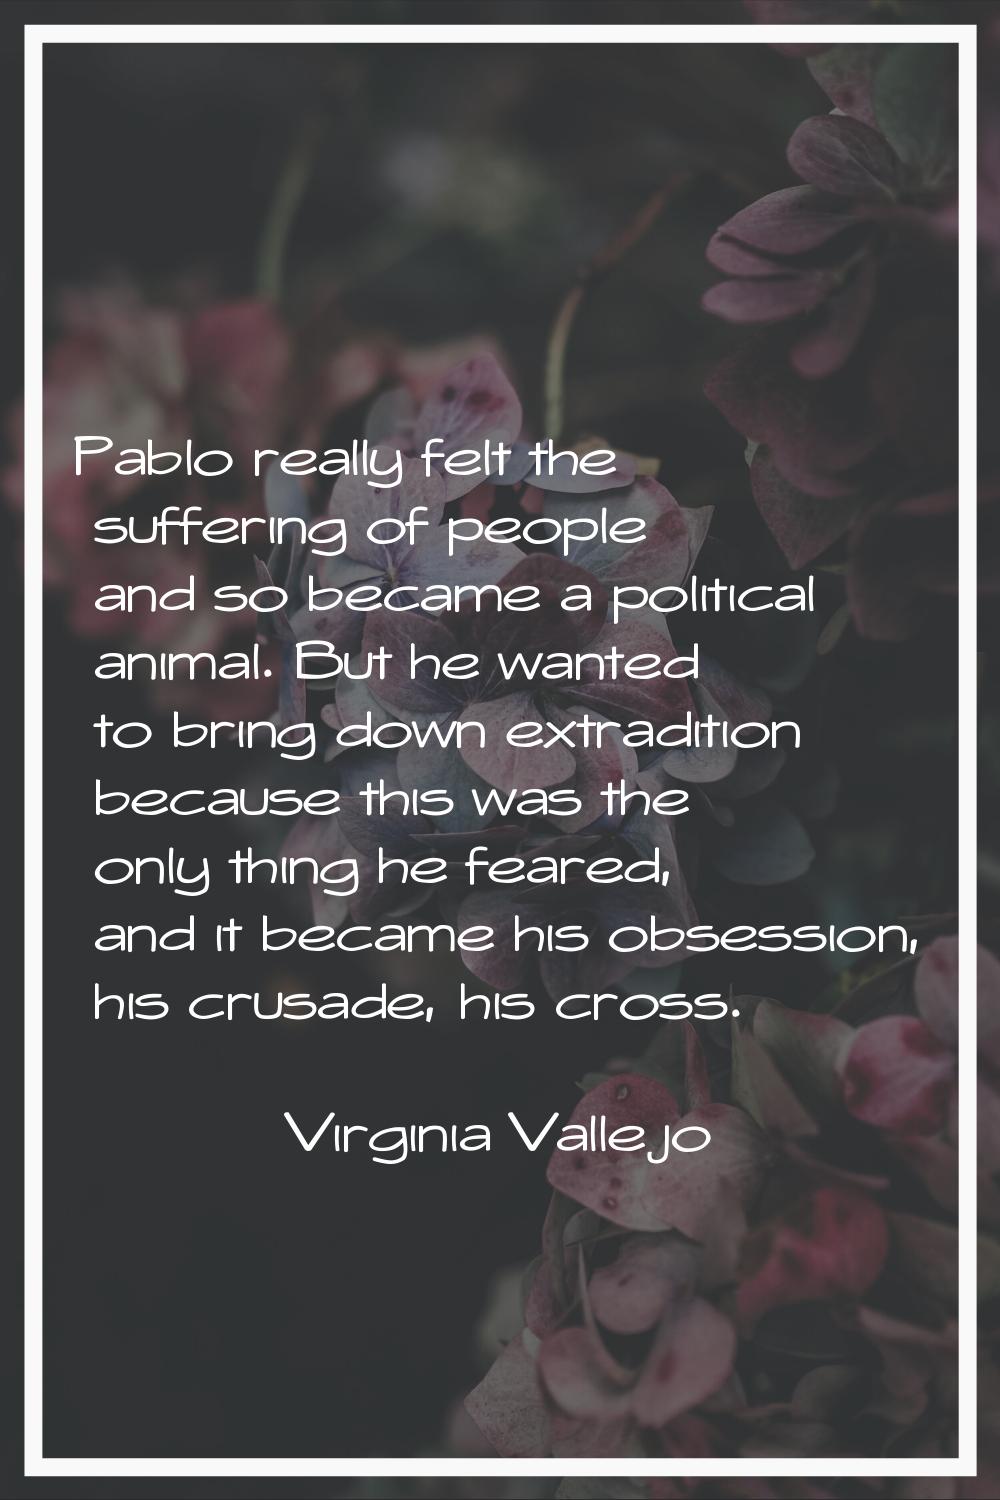 Pablo really felt the suffering of people and so became a political animal. But he wanted to bring 